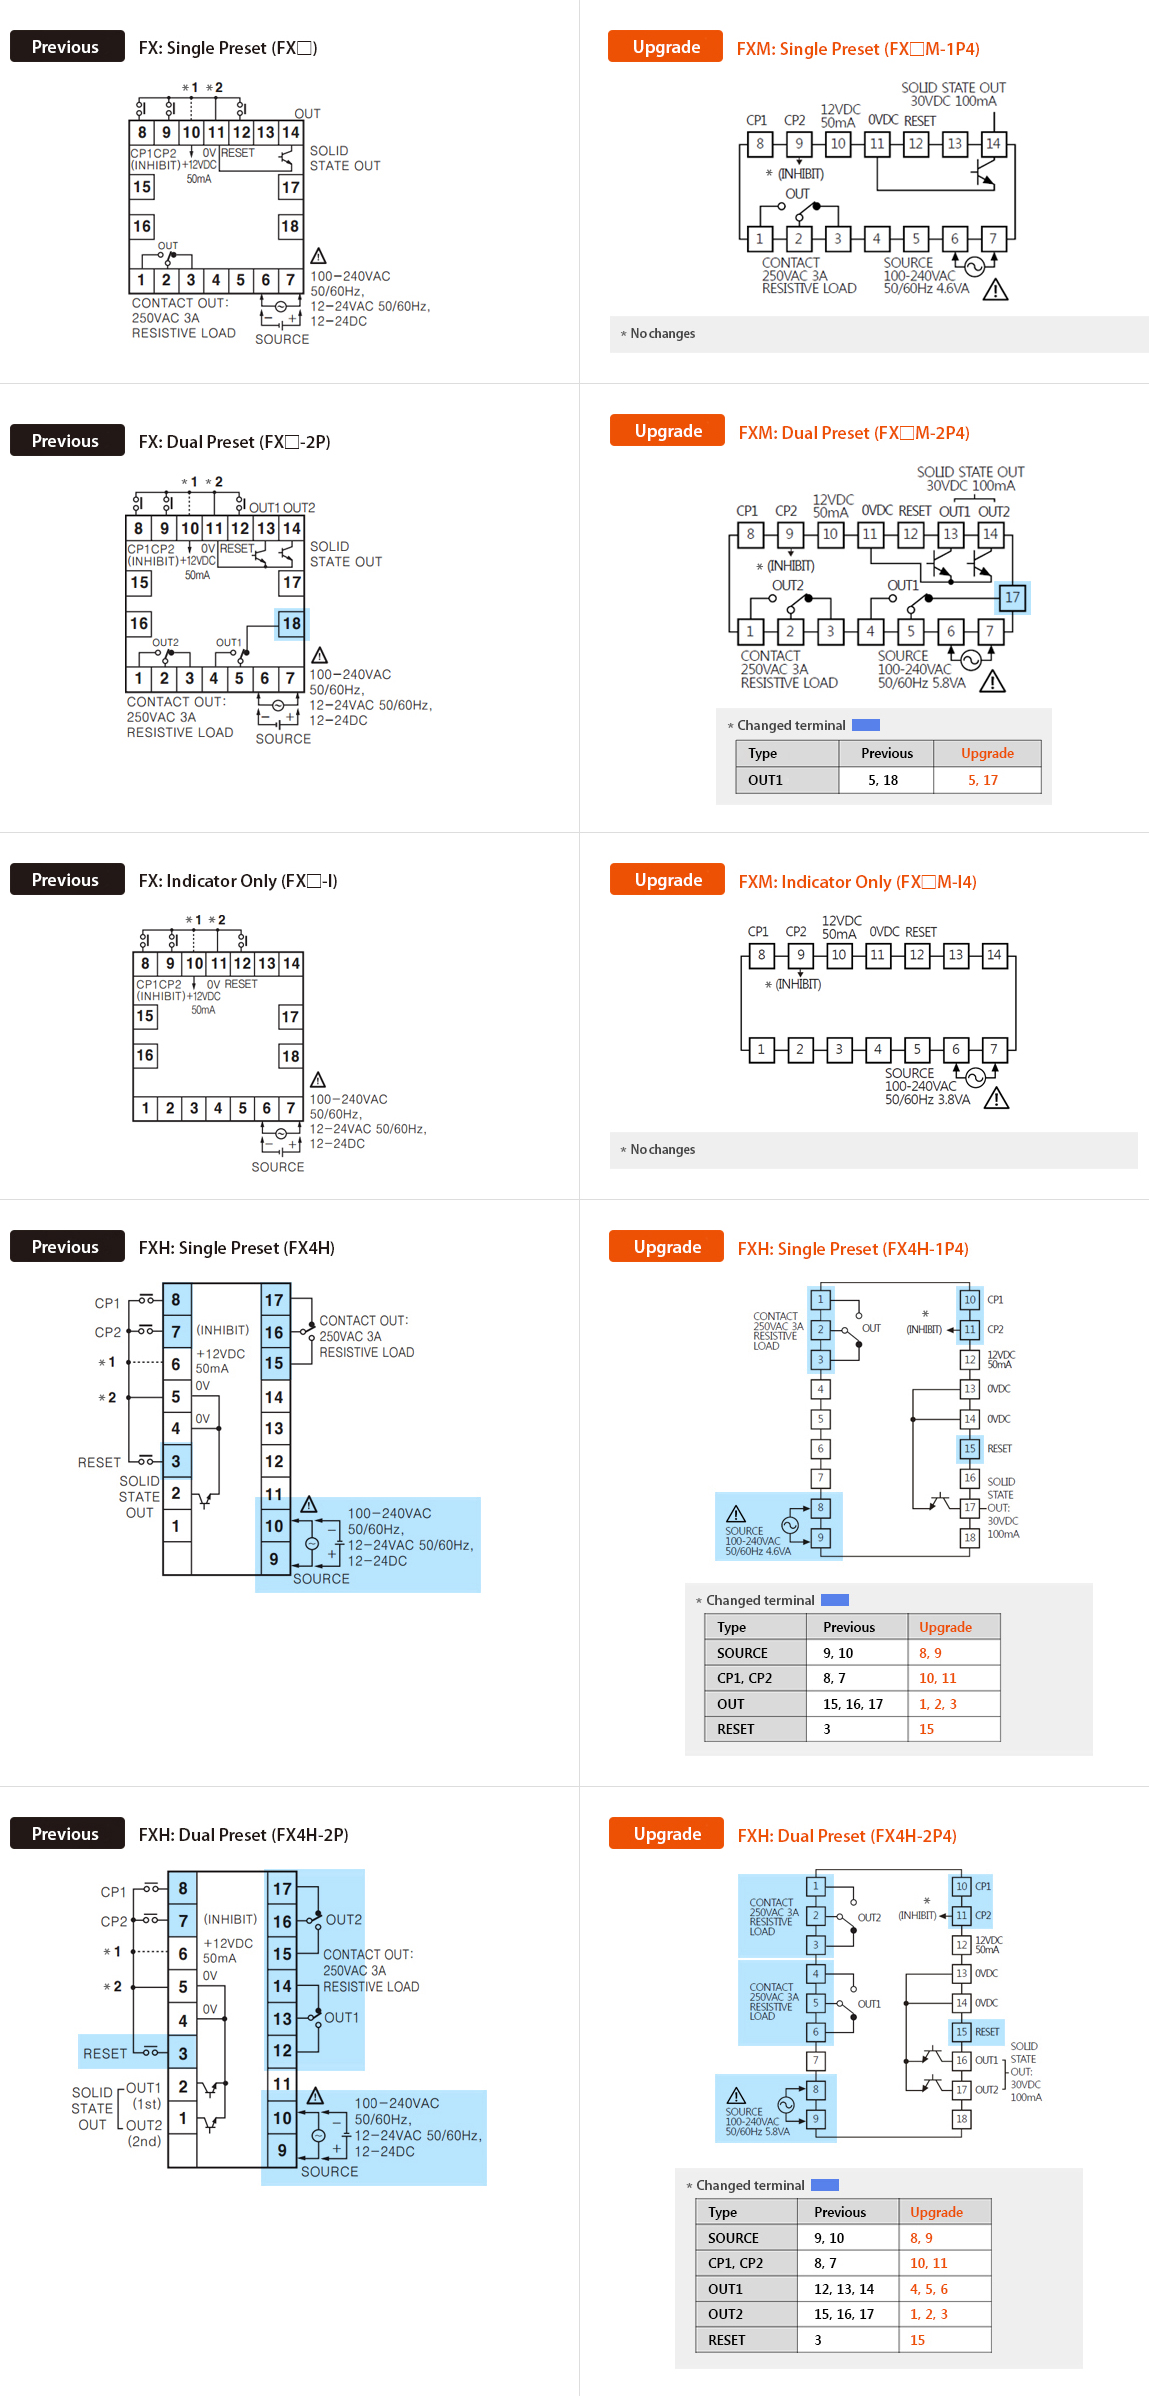 Previous : FX Series, Upgrade : FXM Series Connection diagram - See below for details